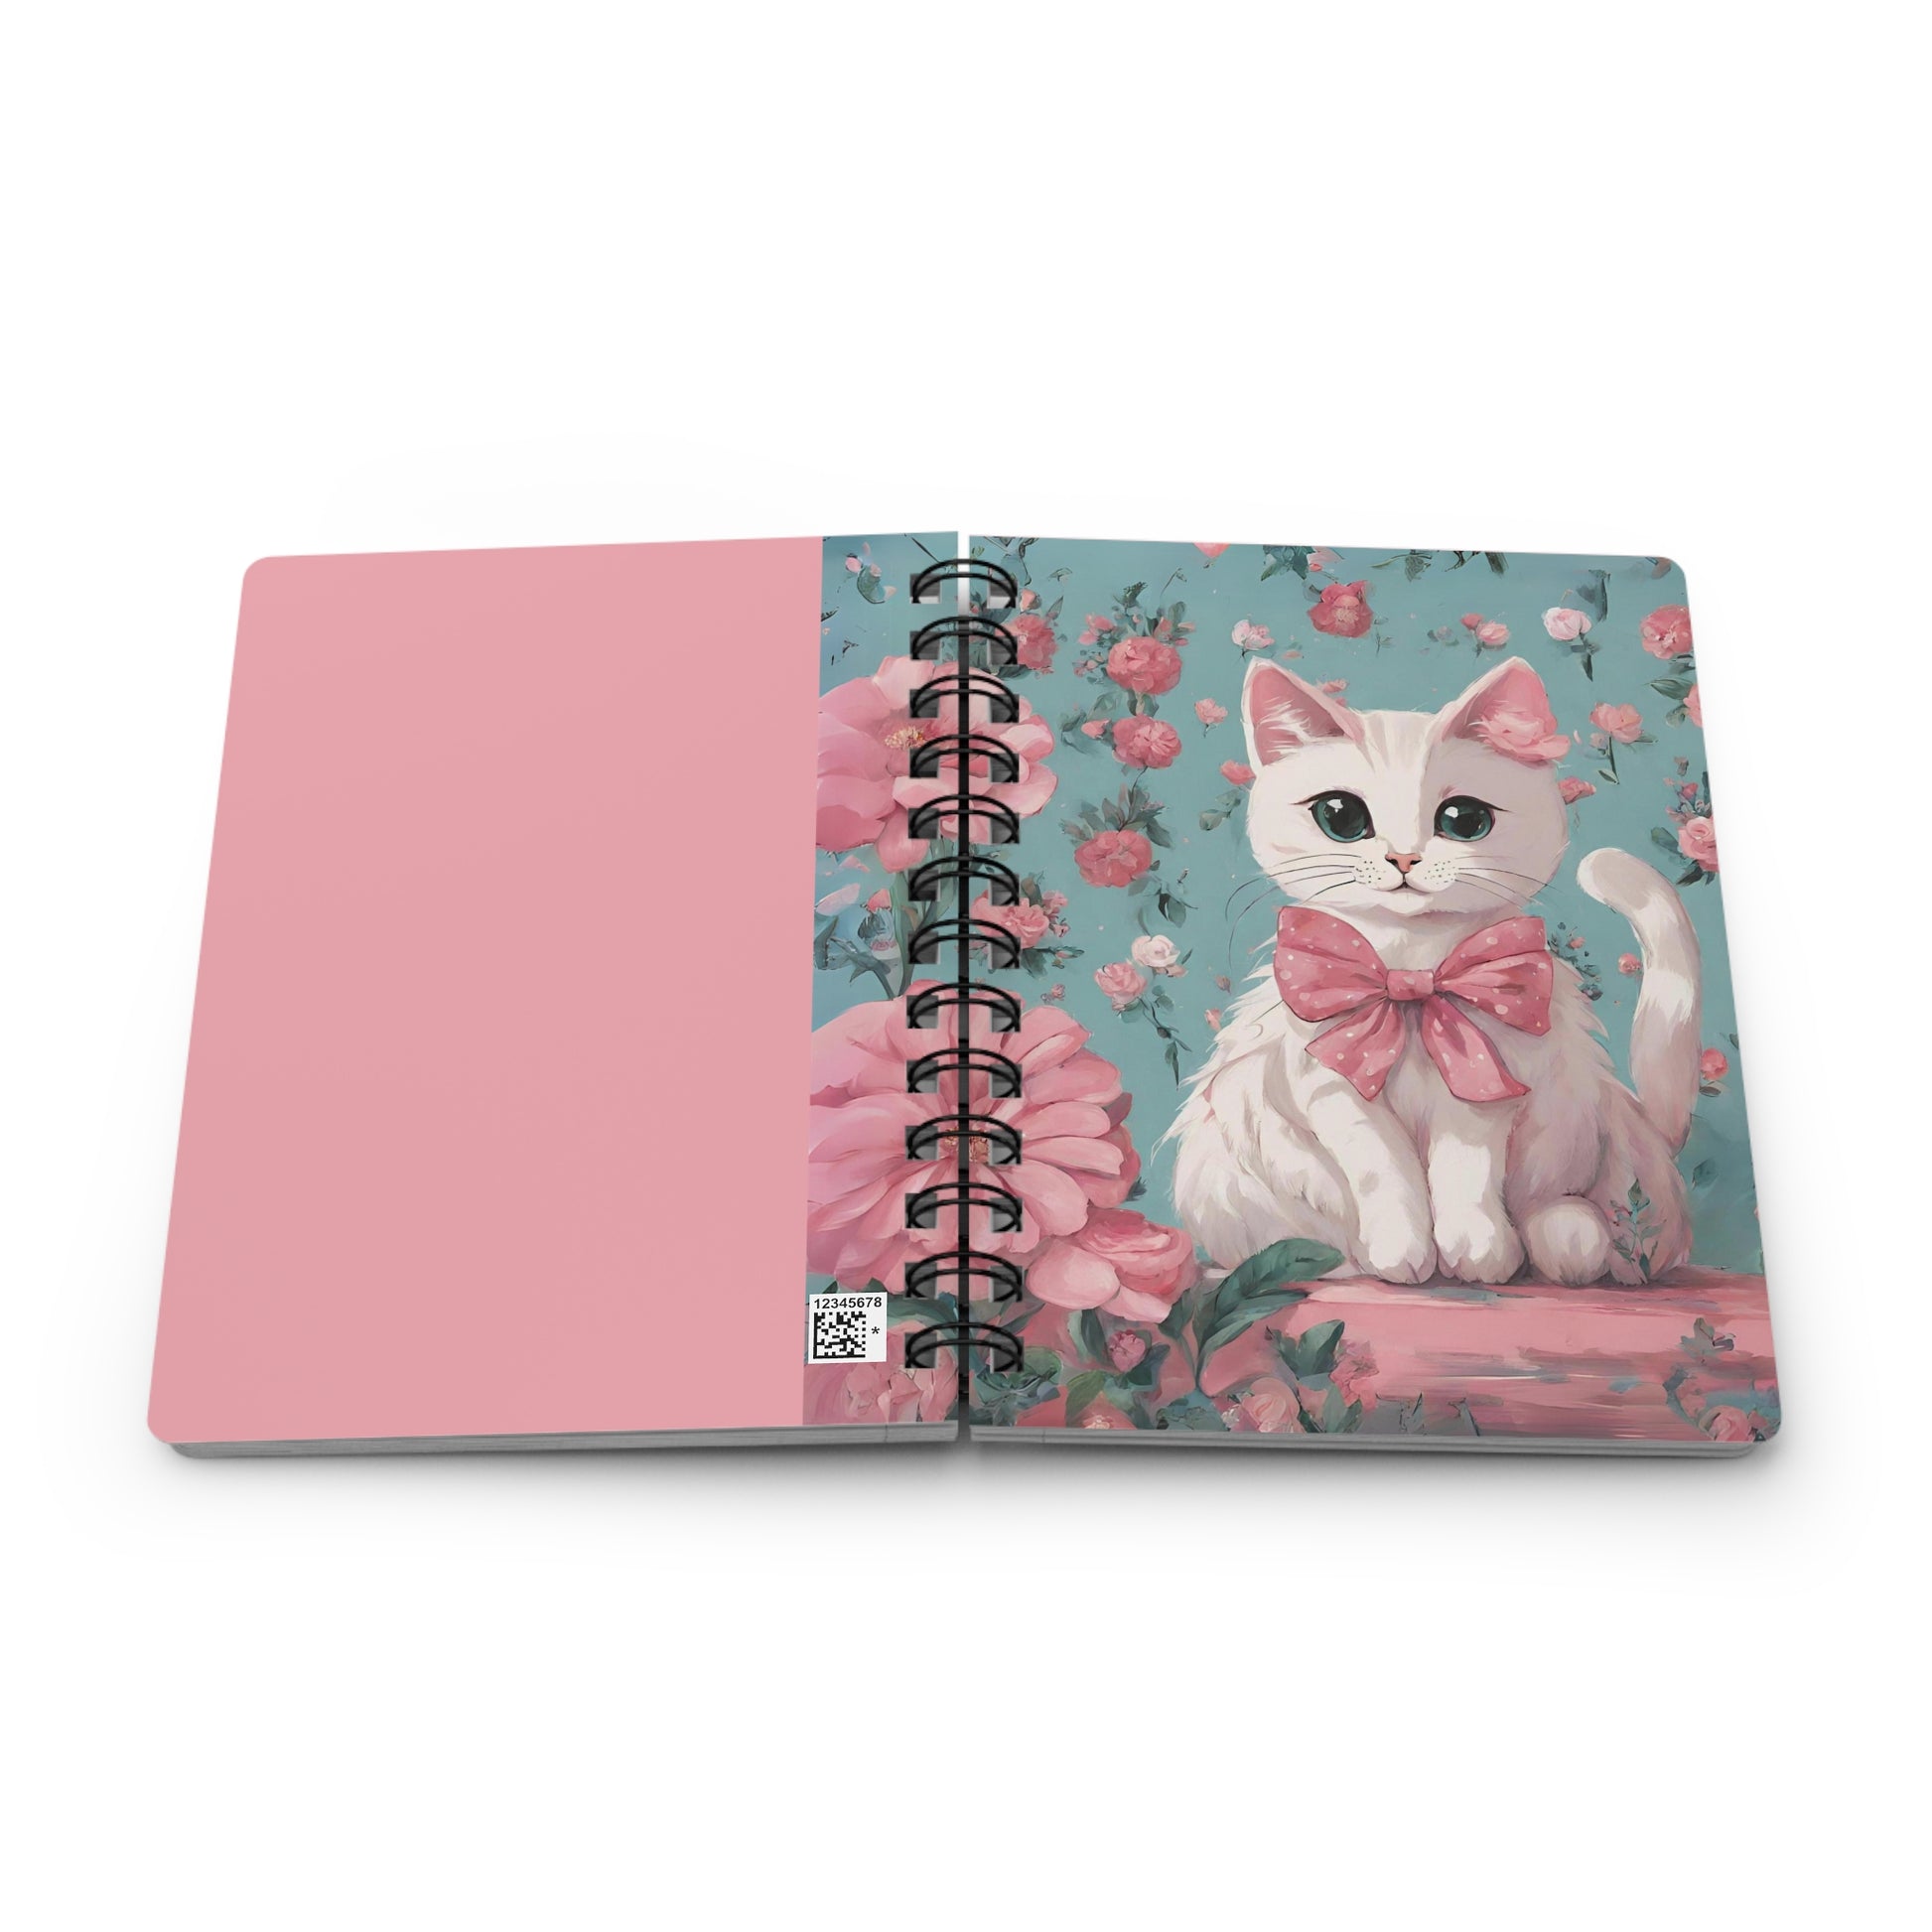 Floral Cat Spiral Journal, Cat Victorian vintage Notebook, Cute Cottagecore aesthetic Journal, Cat lover gift, Kawaii Back to school gift